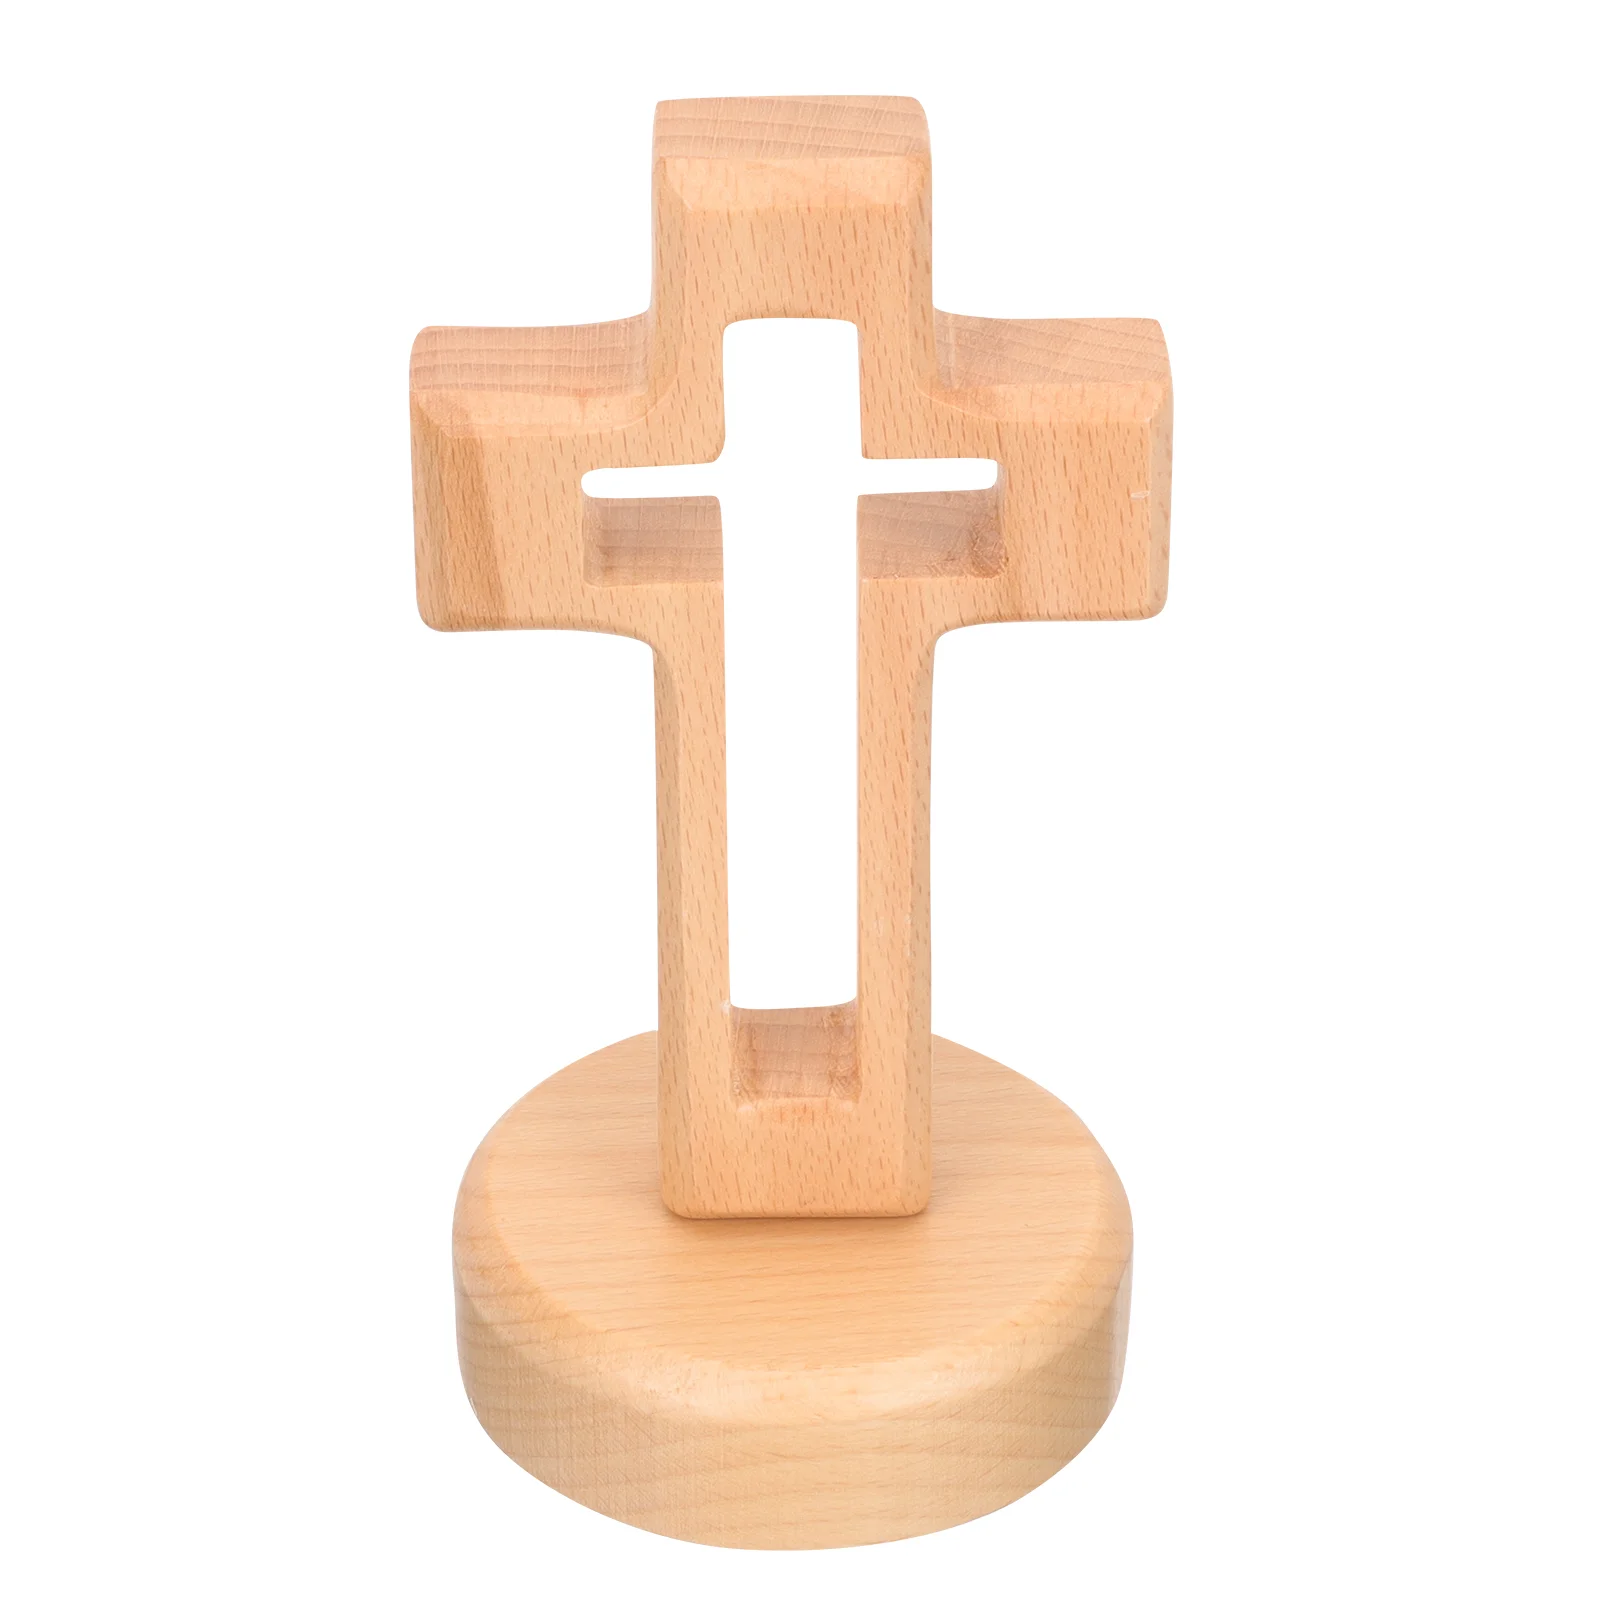 

Cross Wood Wooden Crucifix Standing Decor Religious Table Rainbow Baby Gifts Jesus Crosses Wall Christian Holy Ornament Catholic